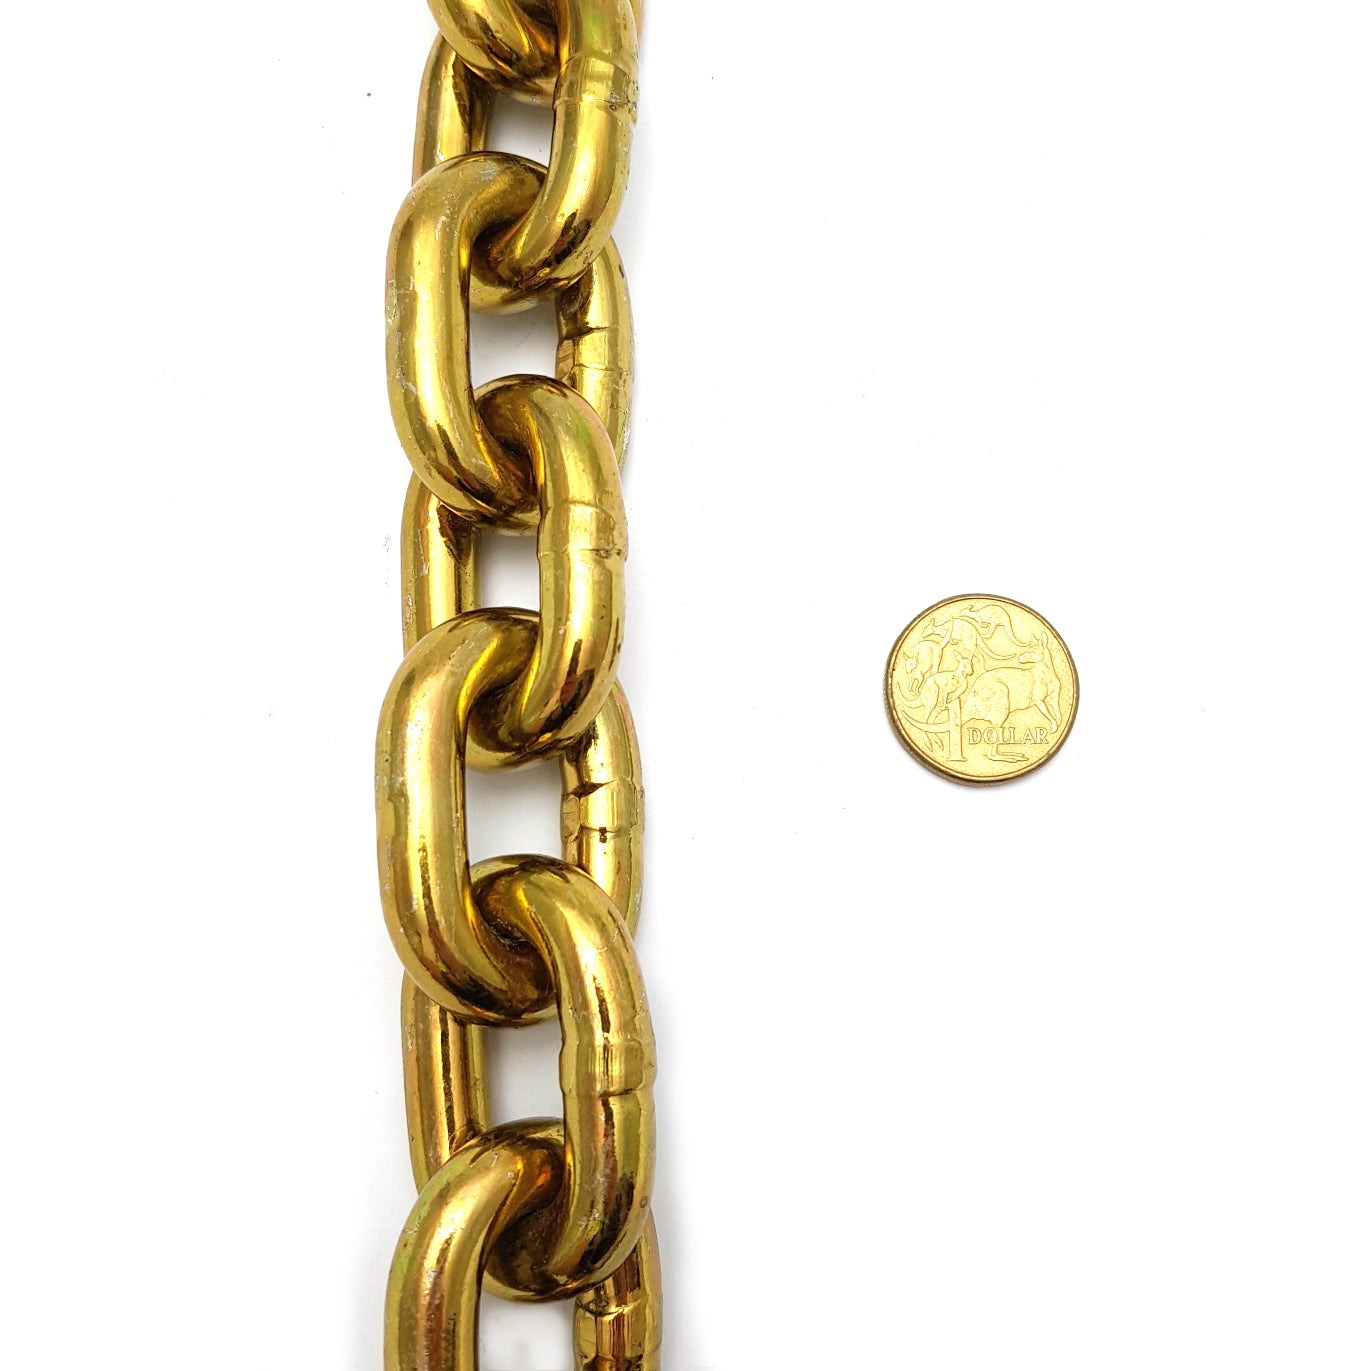 Hardened security chain, size: 10mm x 2 metres long. Melbourne, Australia.